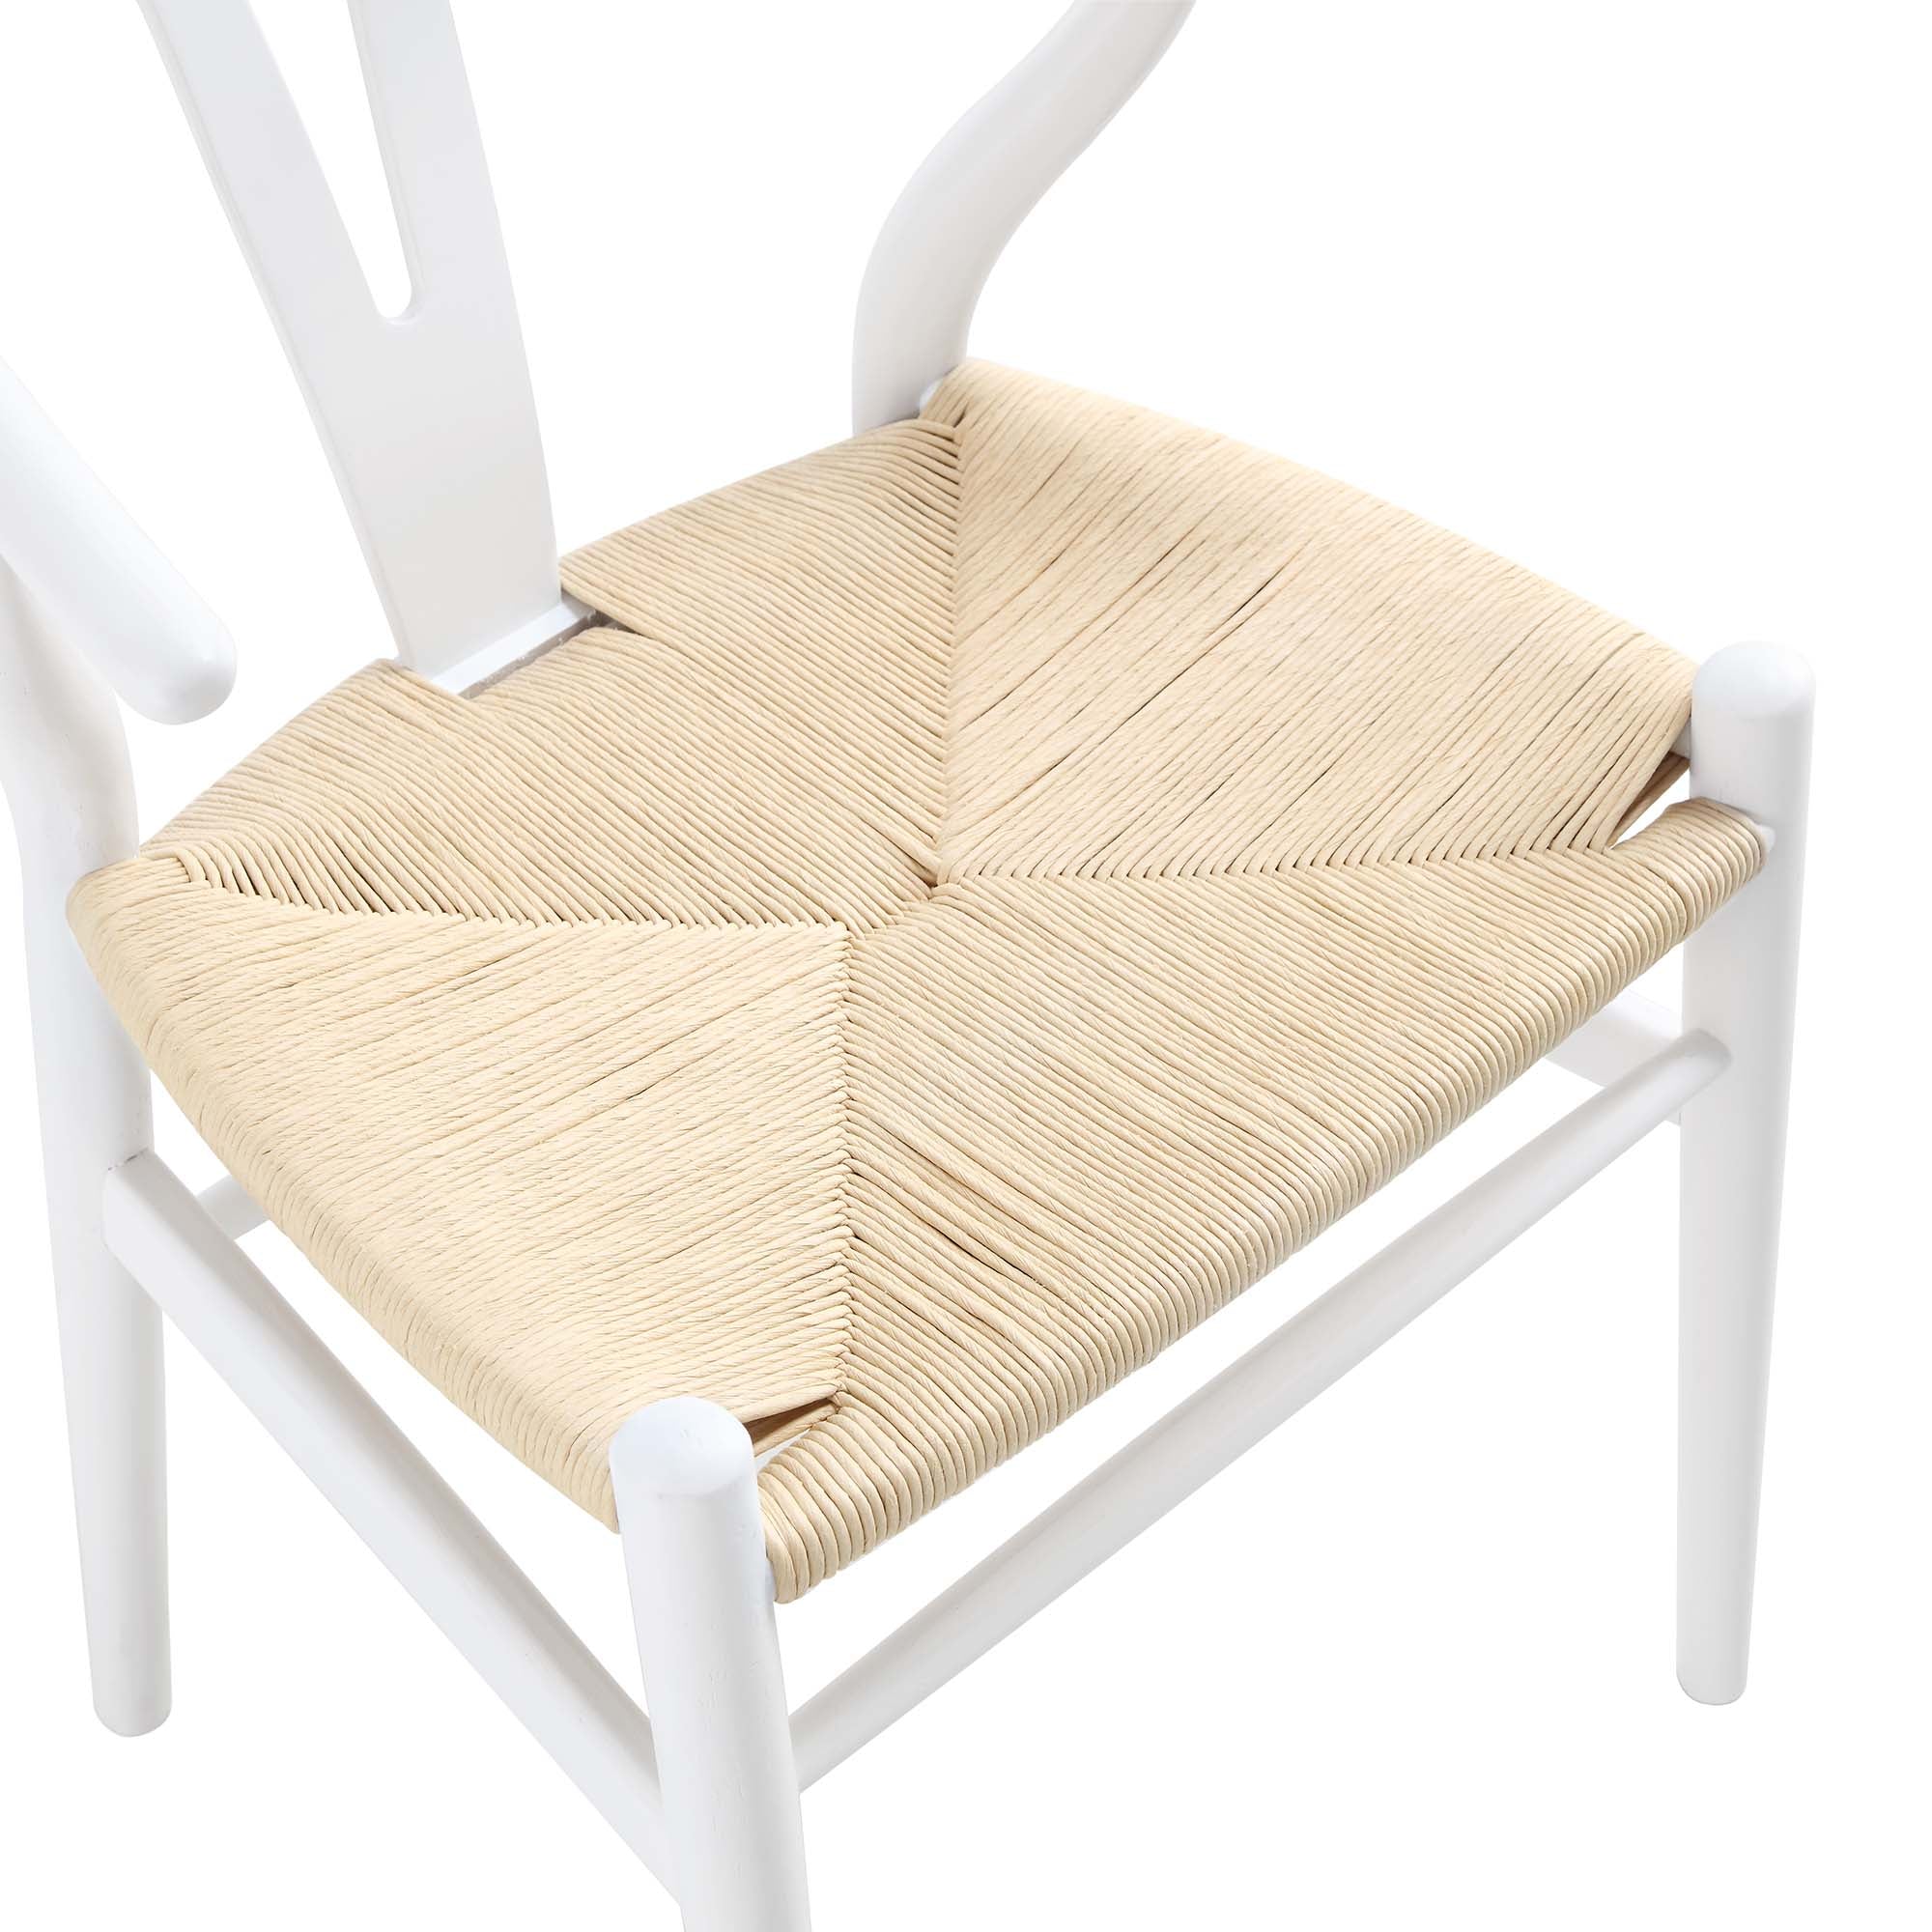 Hansel Wooden Natural Weave Wishbone Dining Chair, White Colour Frame